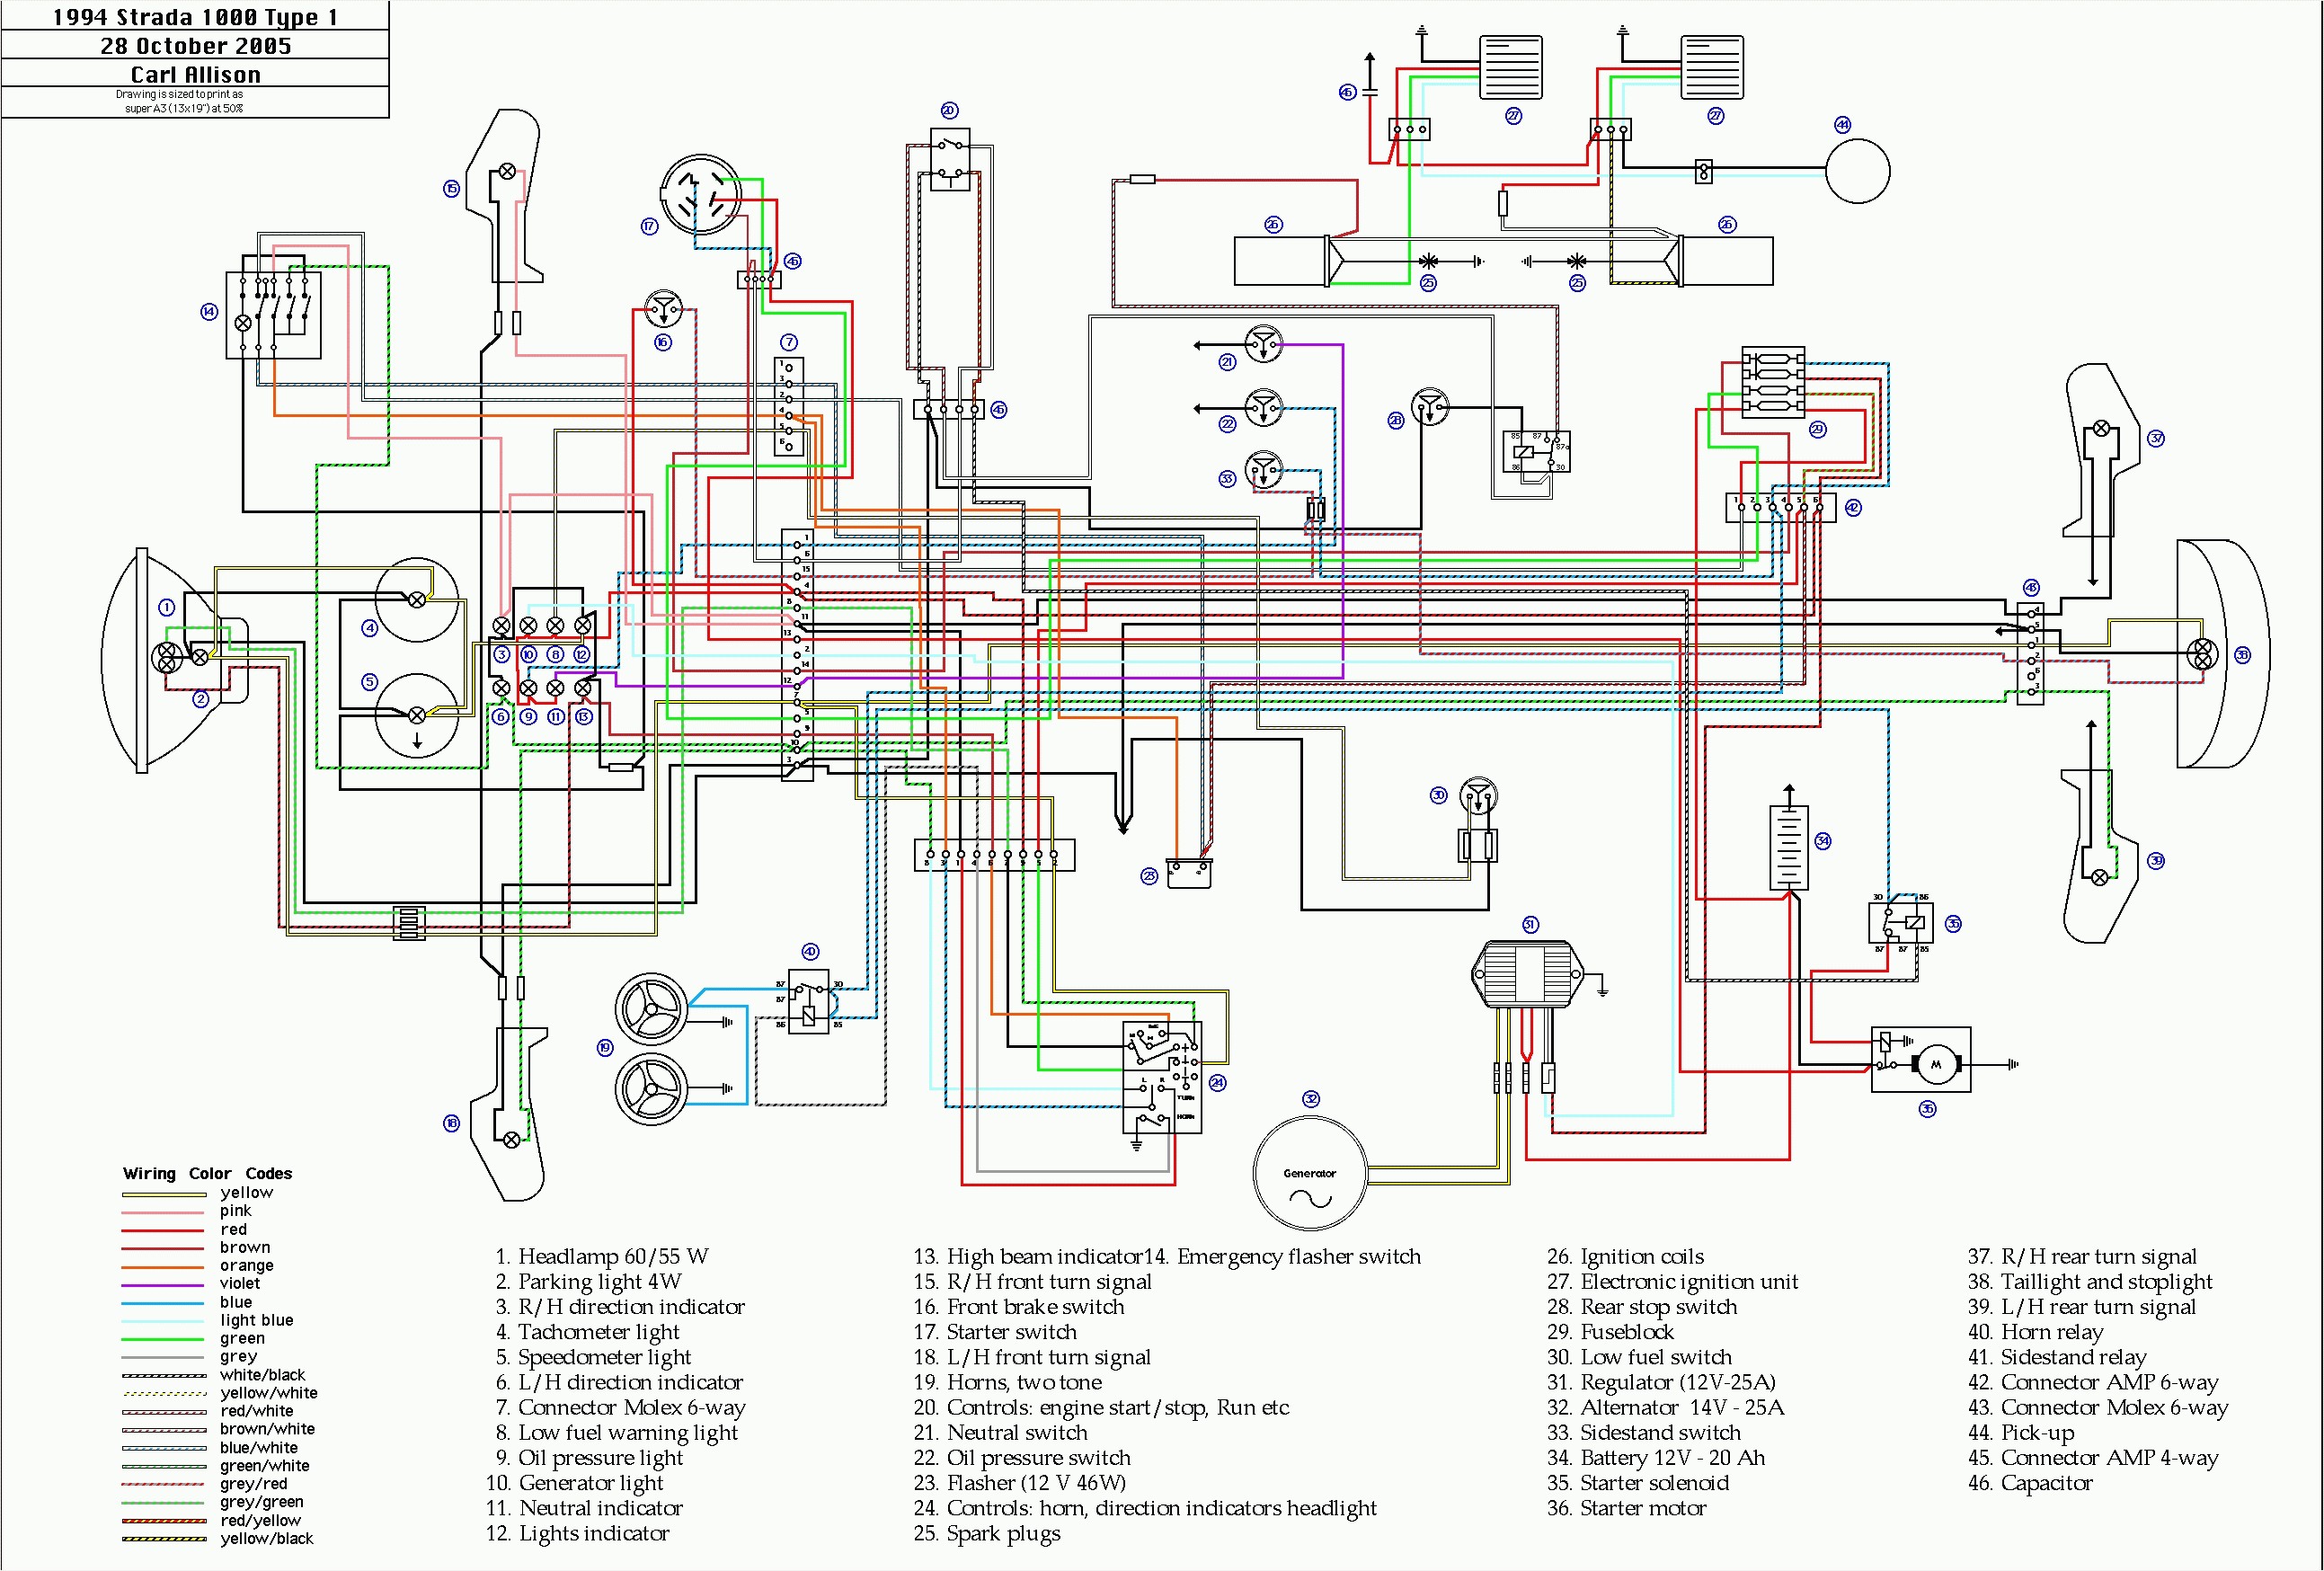 1994 3010 Diesel Tractor Ignition Switch Wiring Diagram from detoxicrecenze.com